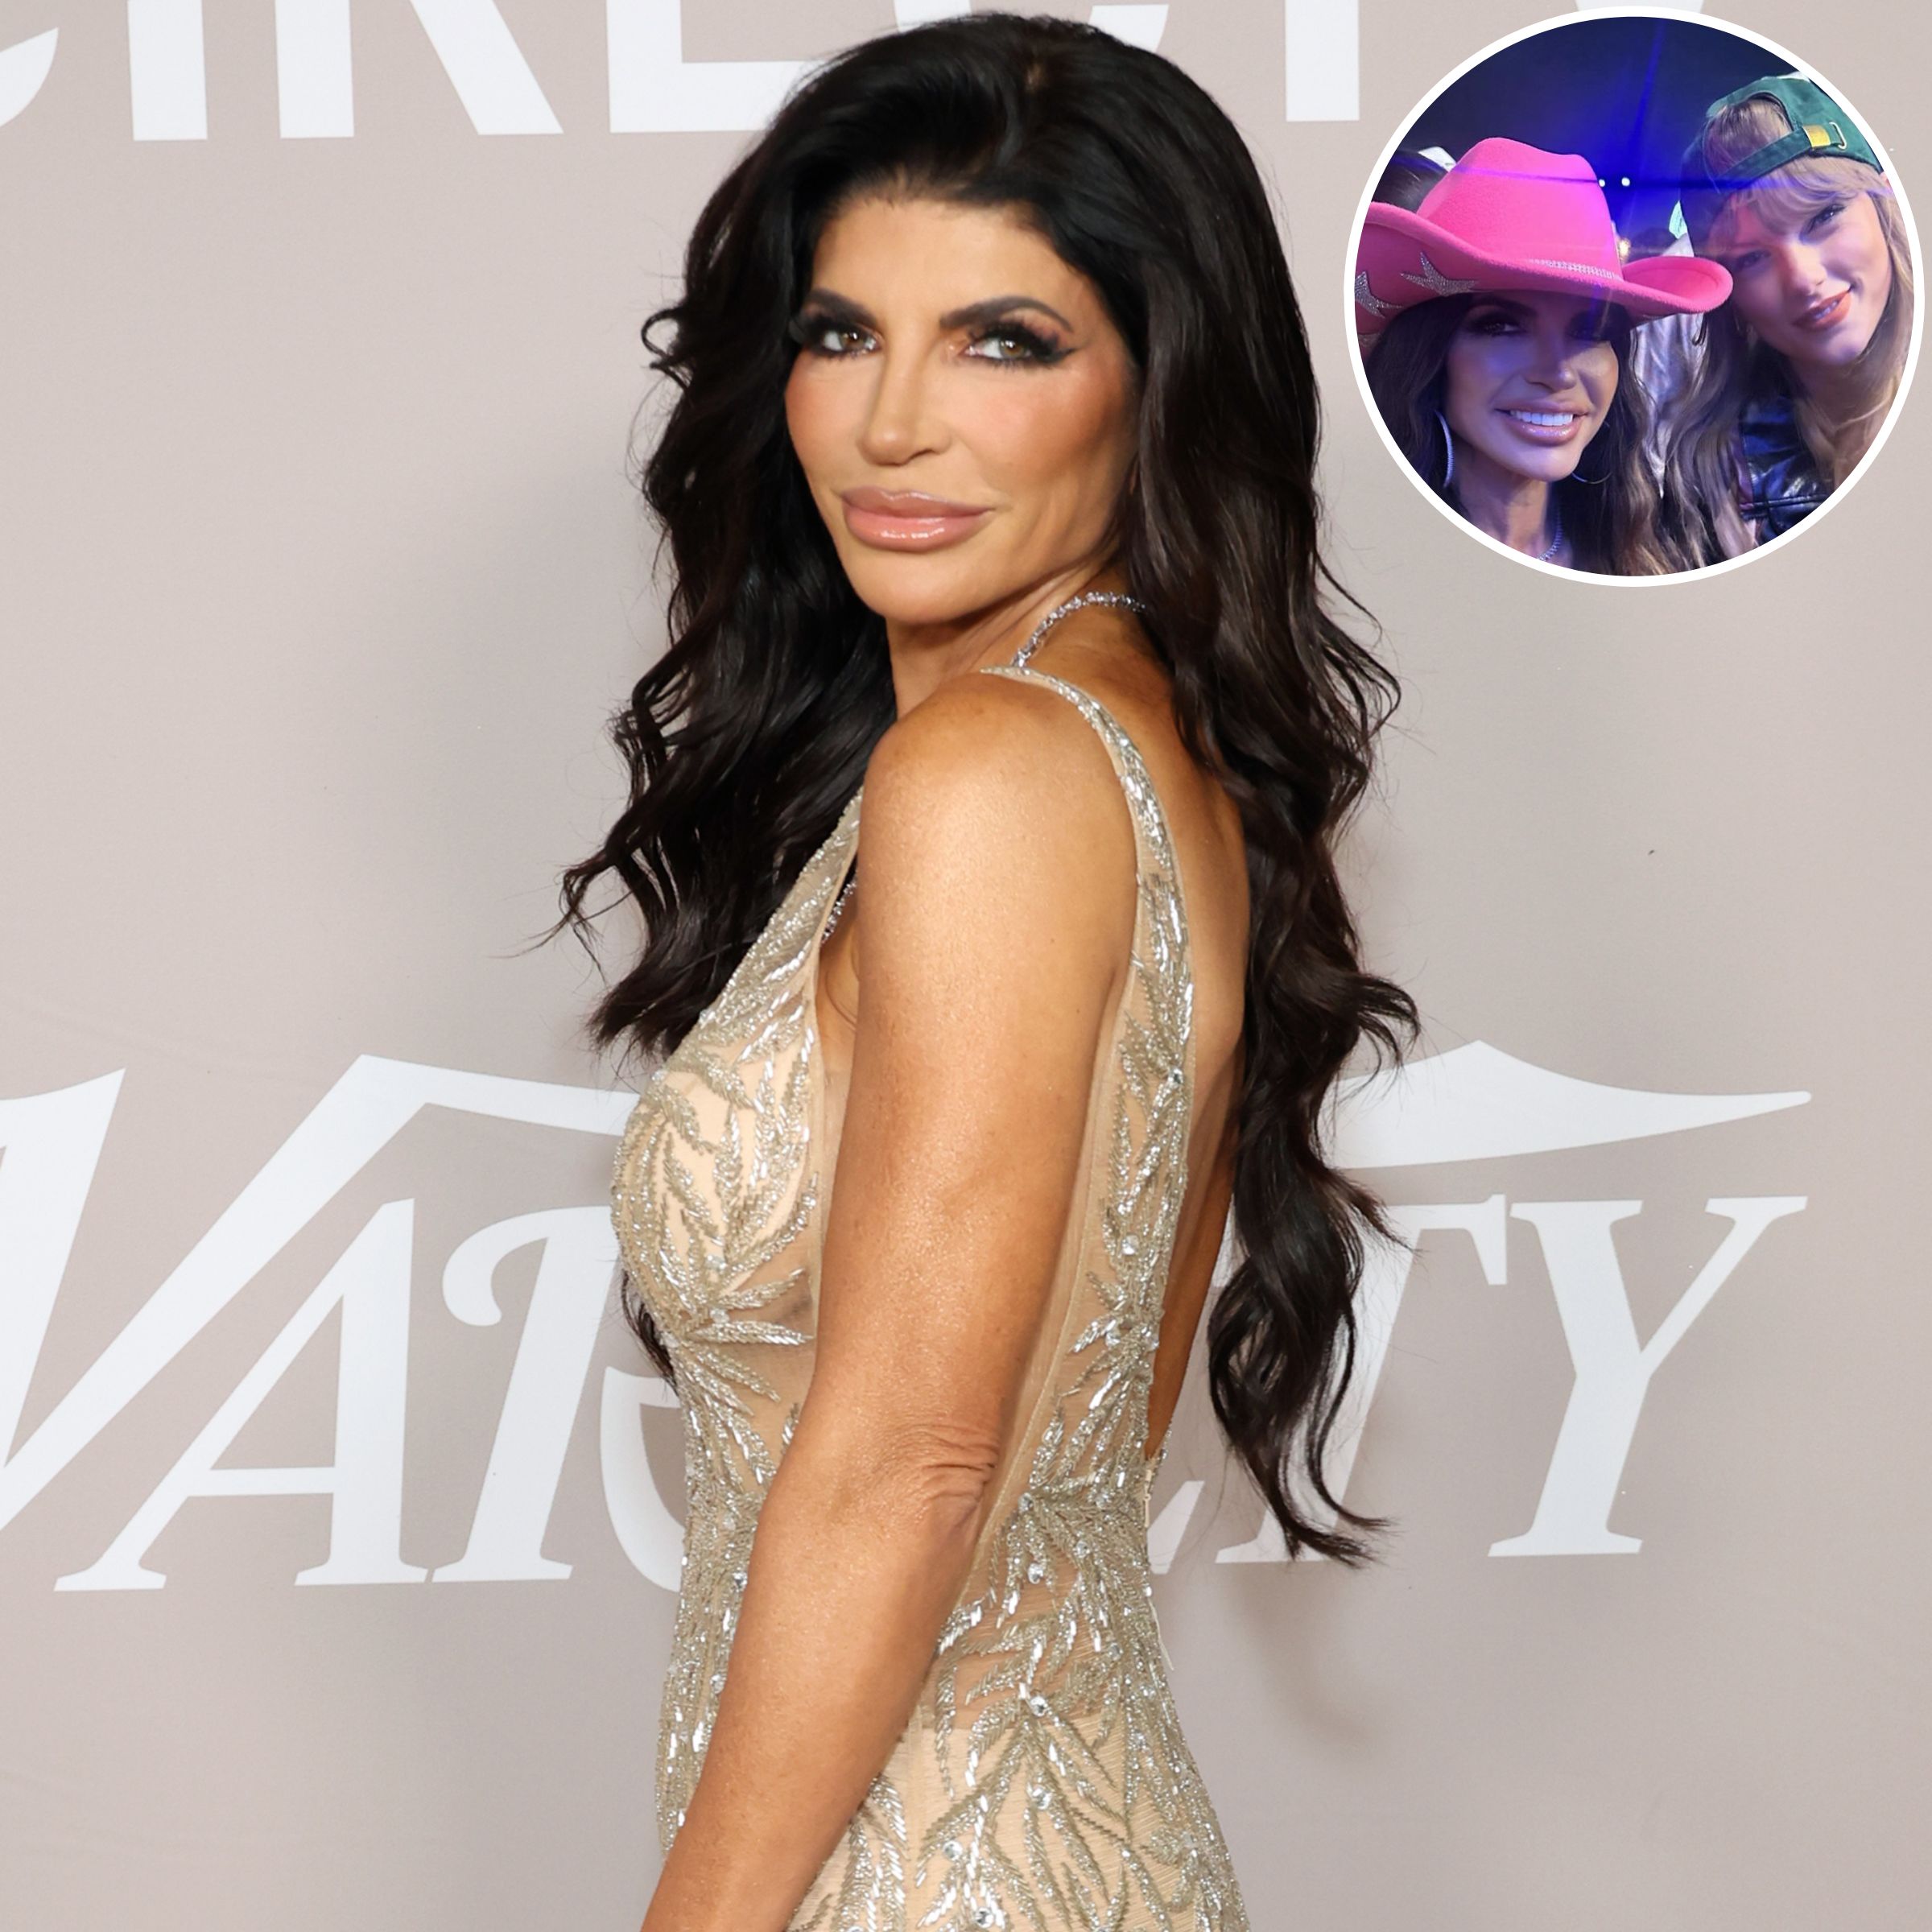 RHONJ's Teresa Guidice on if Taylor Swift Knew Who She Was